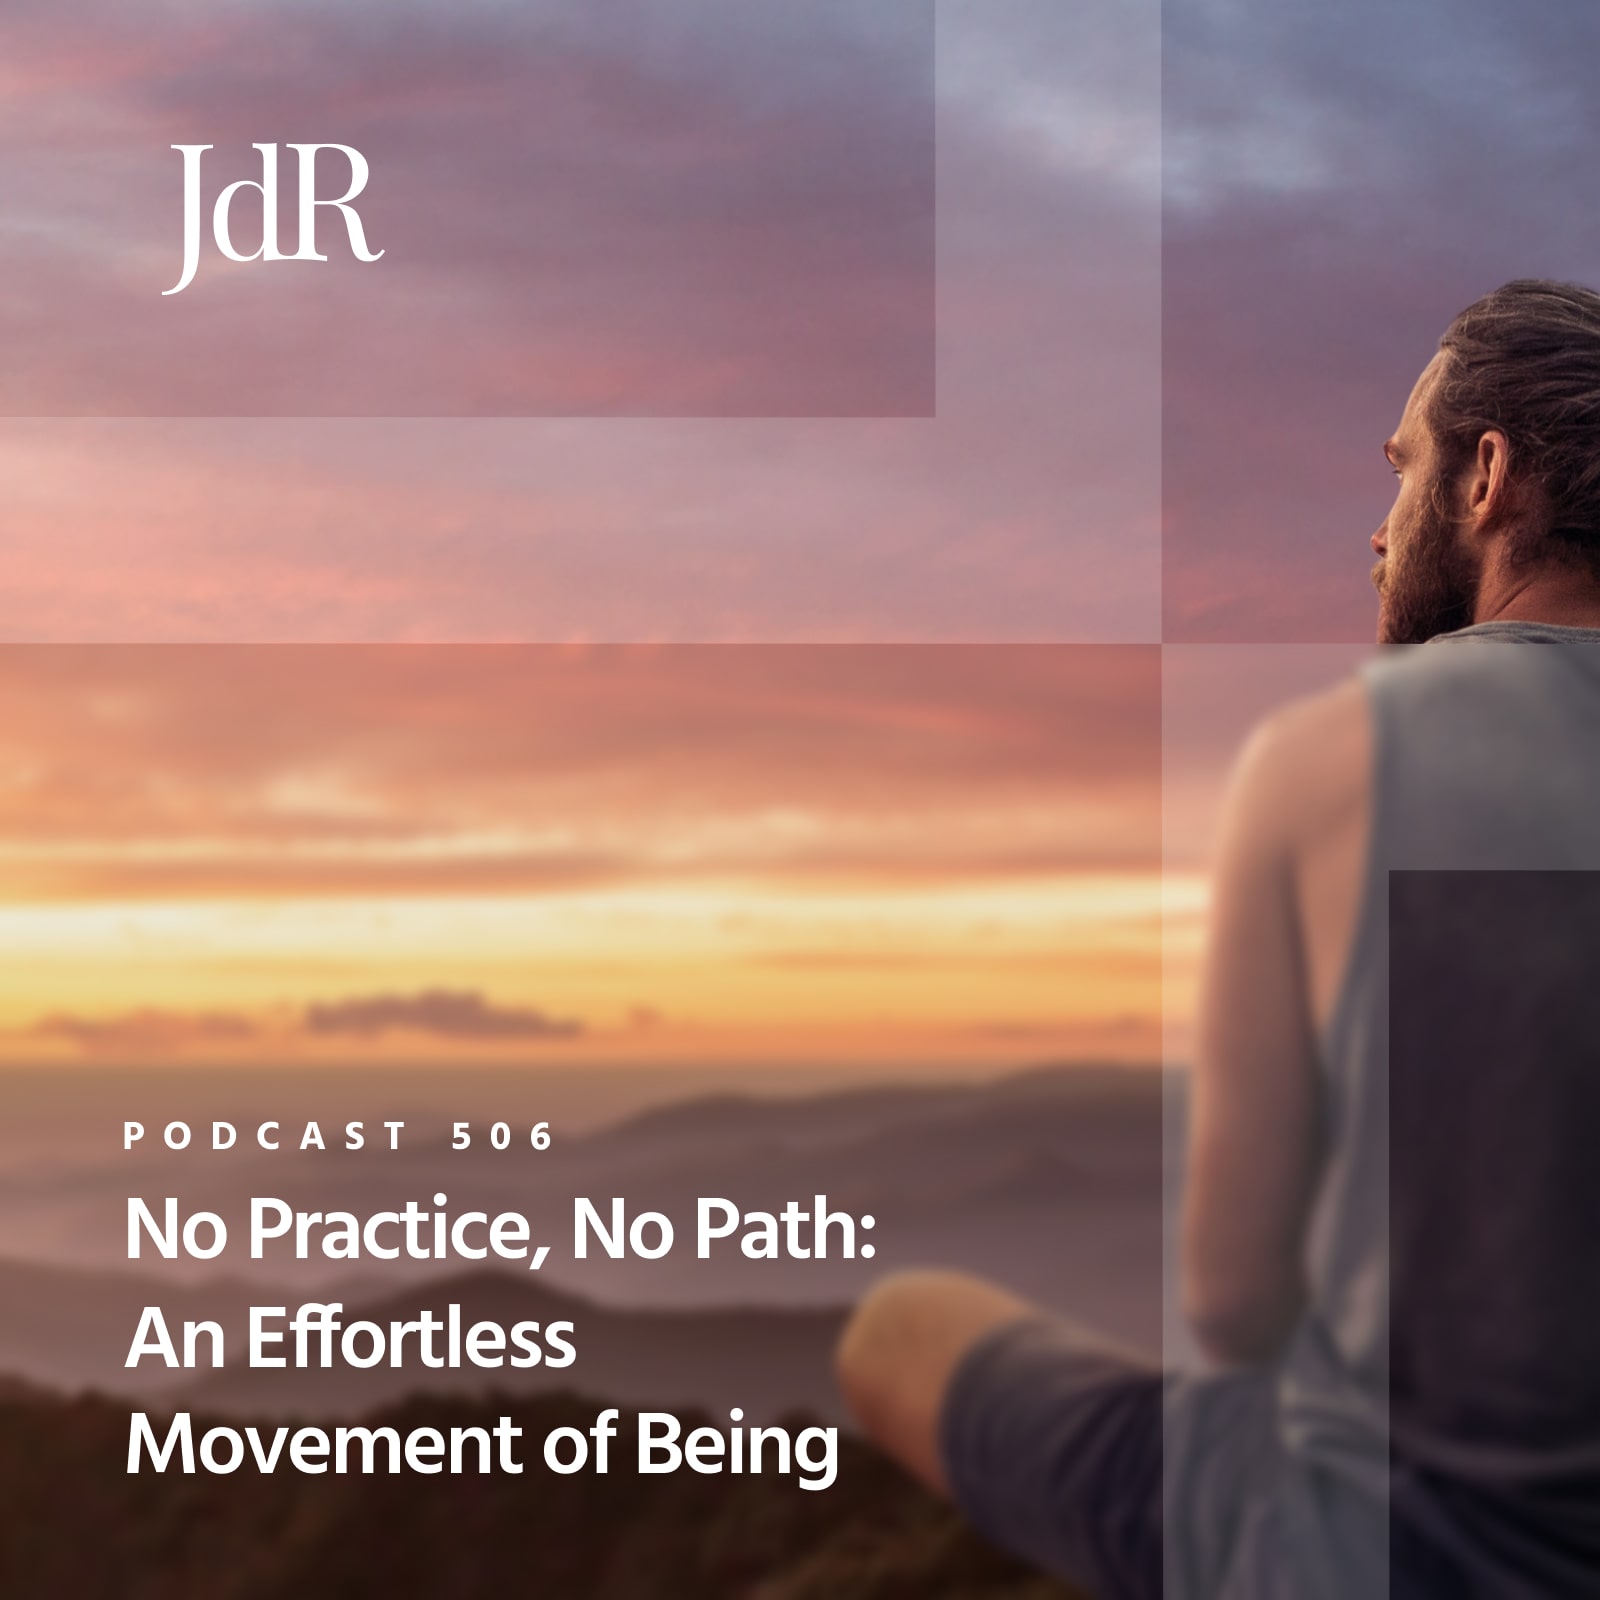 https://johnderuiter.com/wp-content/uploads/JdR-Podcast-506-No-Practise-No-Path-An-Effortless-Movement-of-Being.jpg